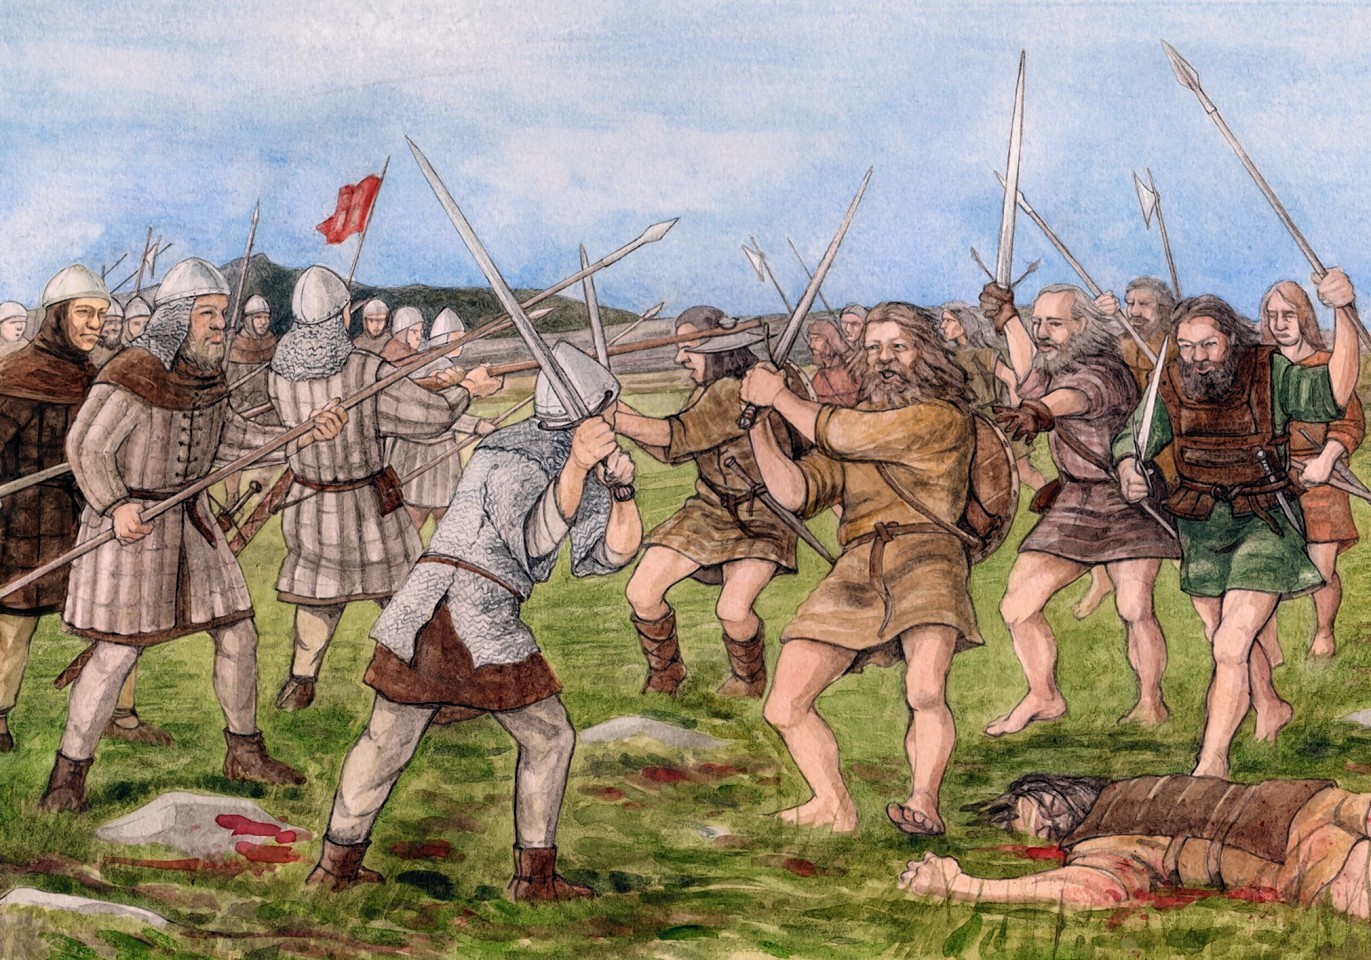 The Battle of Harlaw - which the Burgesses played a key role in